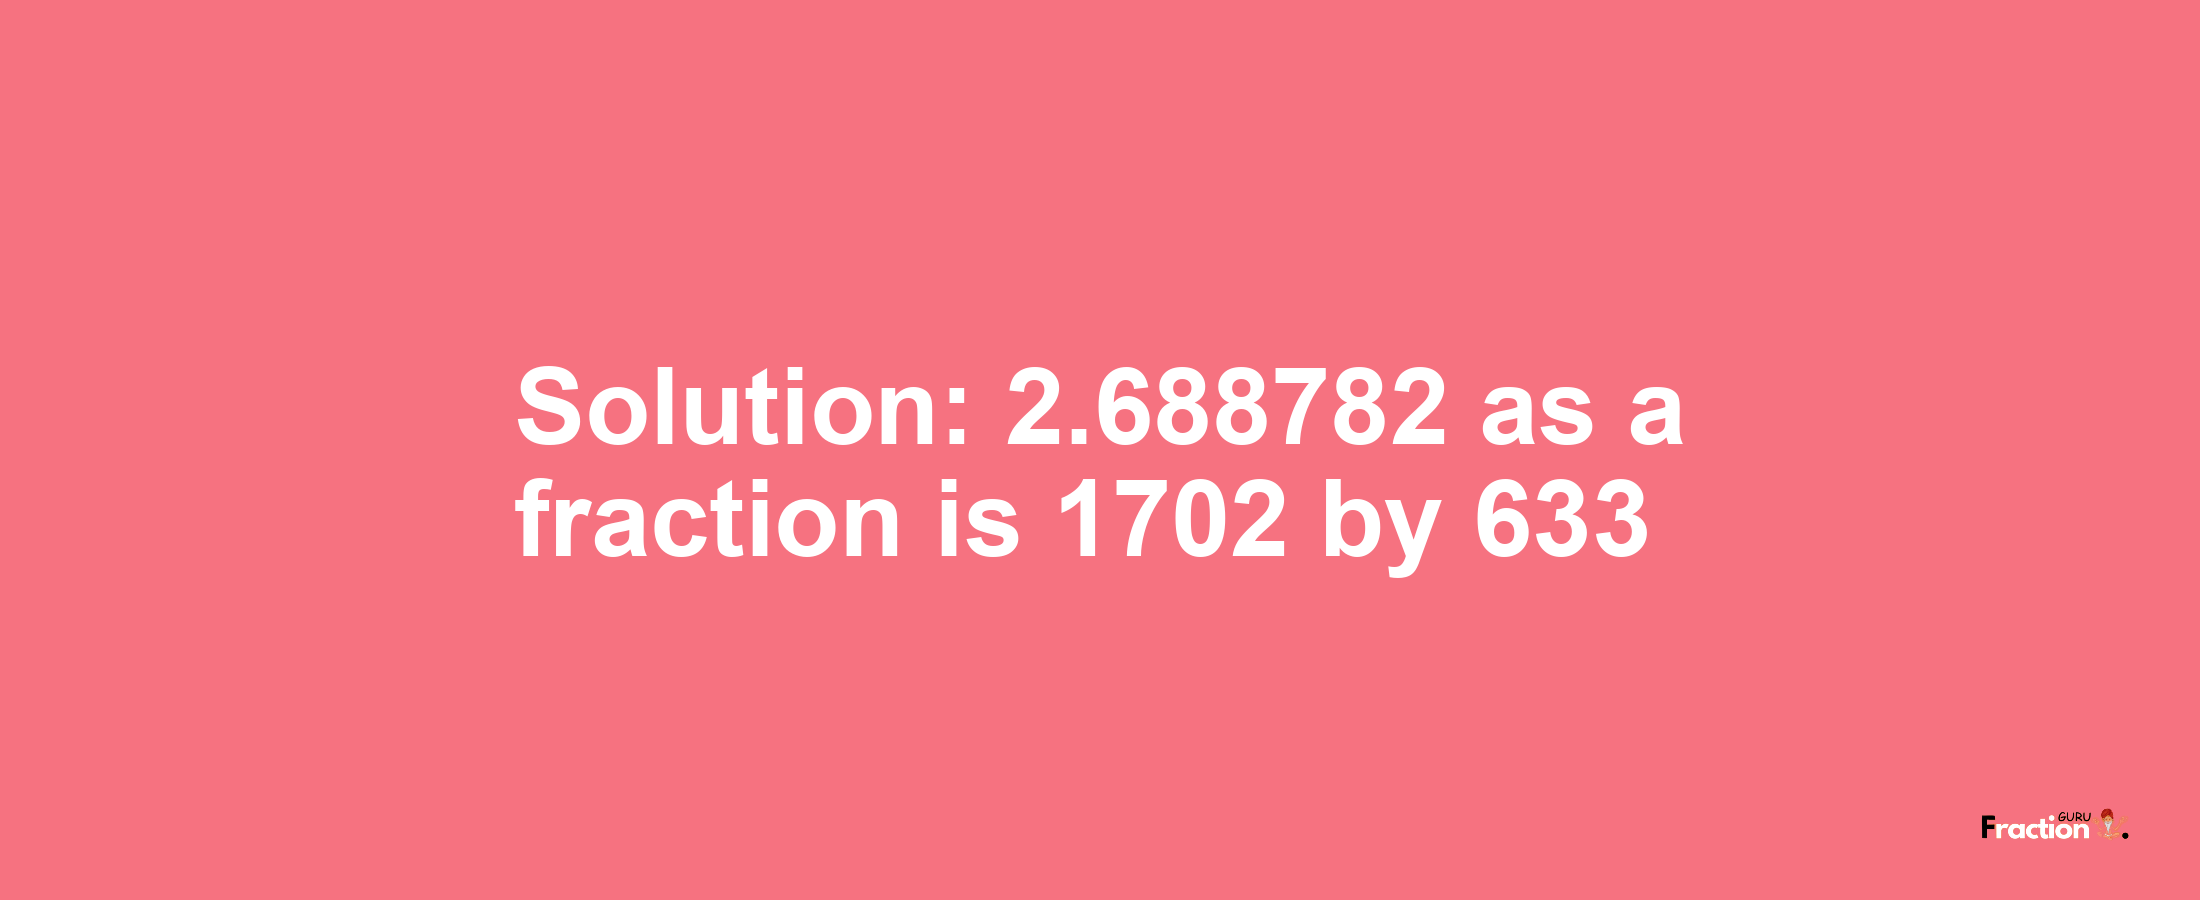 Solution:2.688782 as a fraction is 1702/633